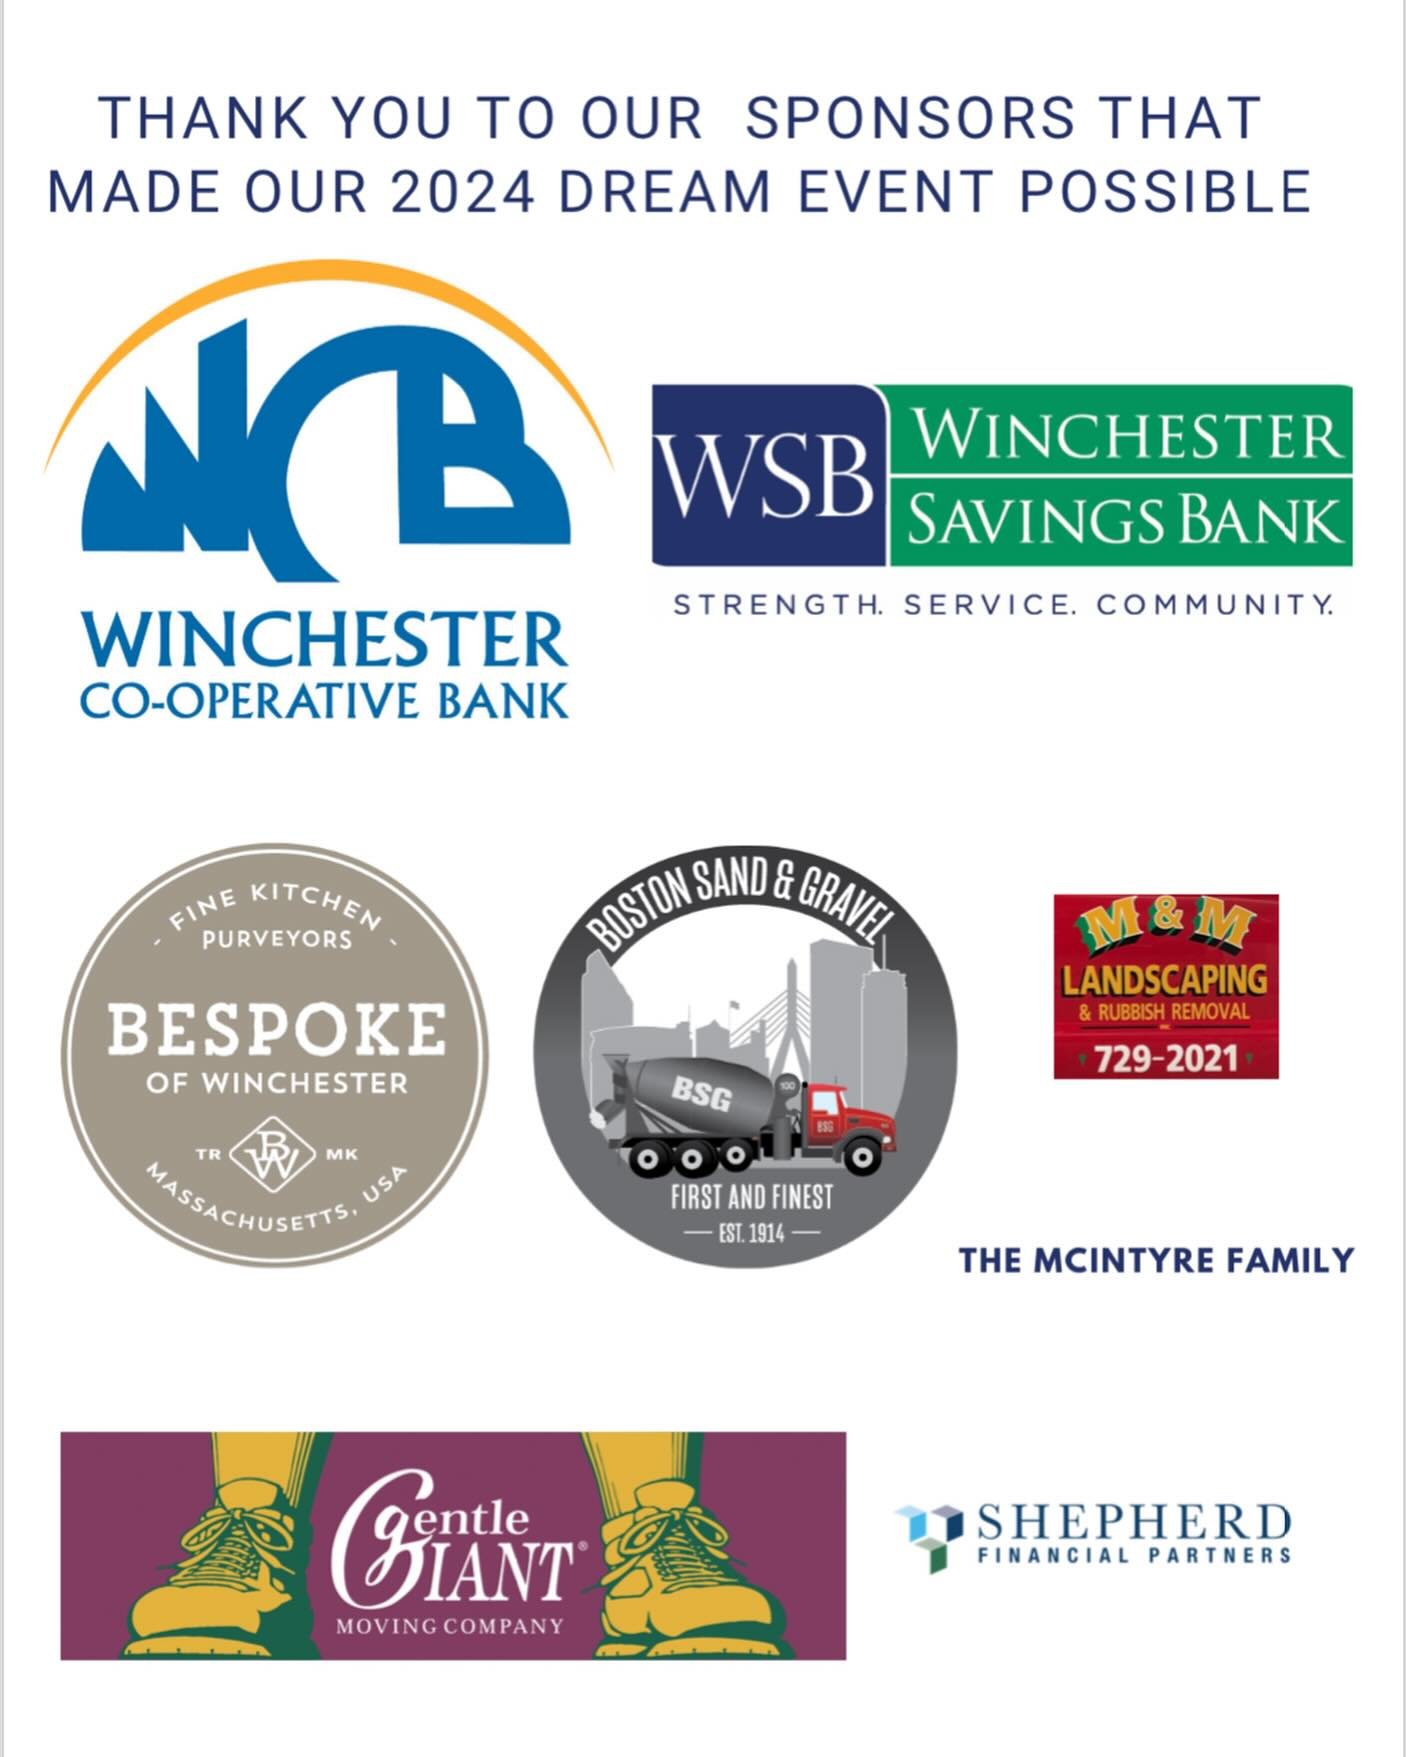 The Dream Event was possible because of great support from our sponsors! Thank you to these businesses and individuals for helping us reach our goal! #winchesterabc ✨